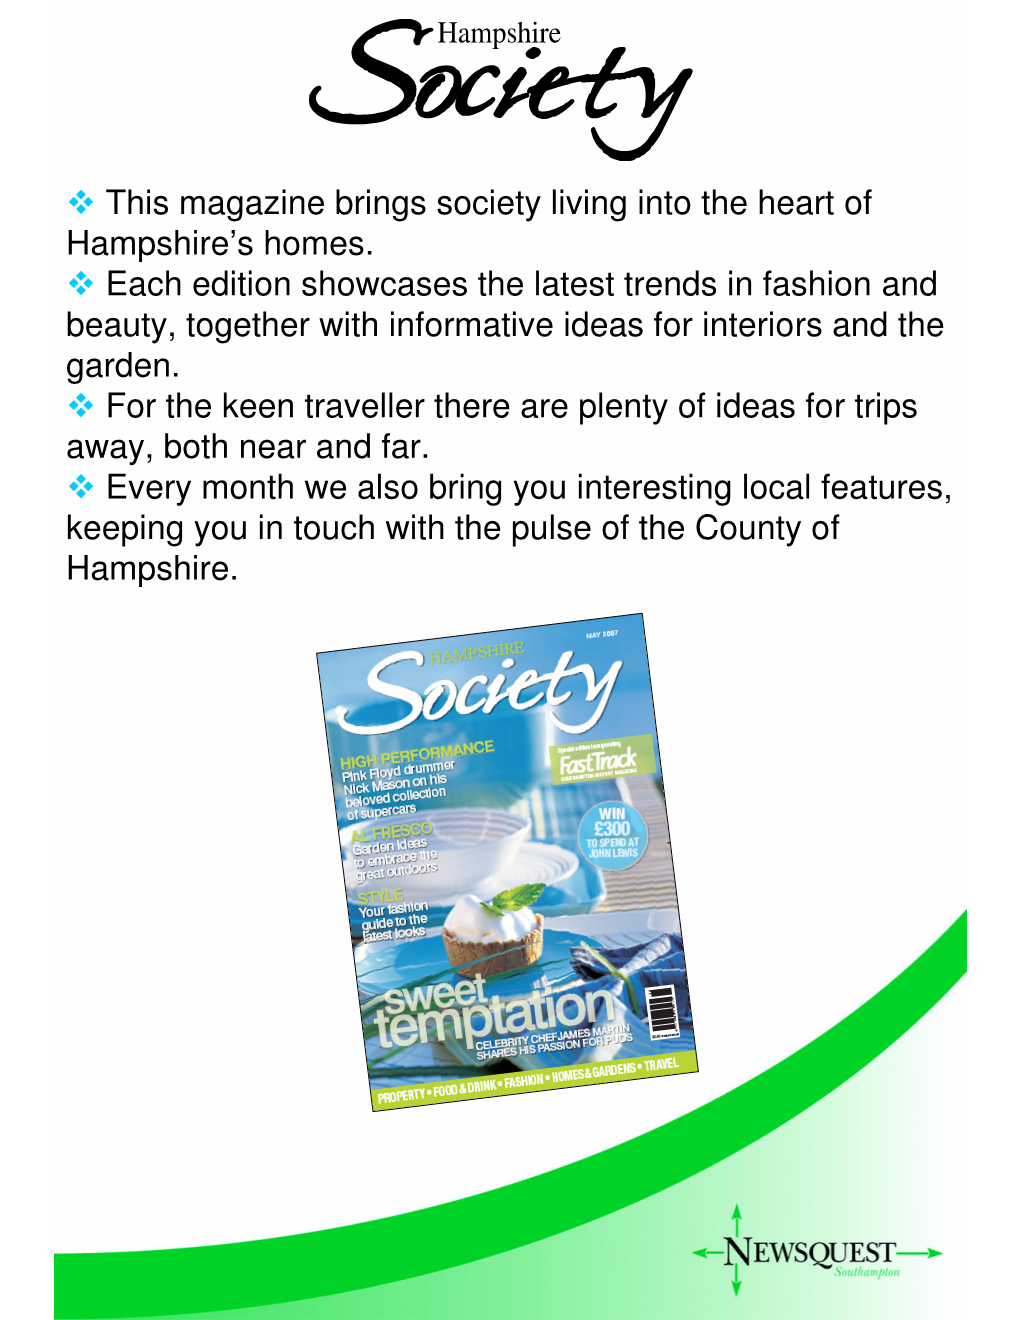 This Magazine Brings Society Living Into the Heart of Hampshire's Homes